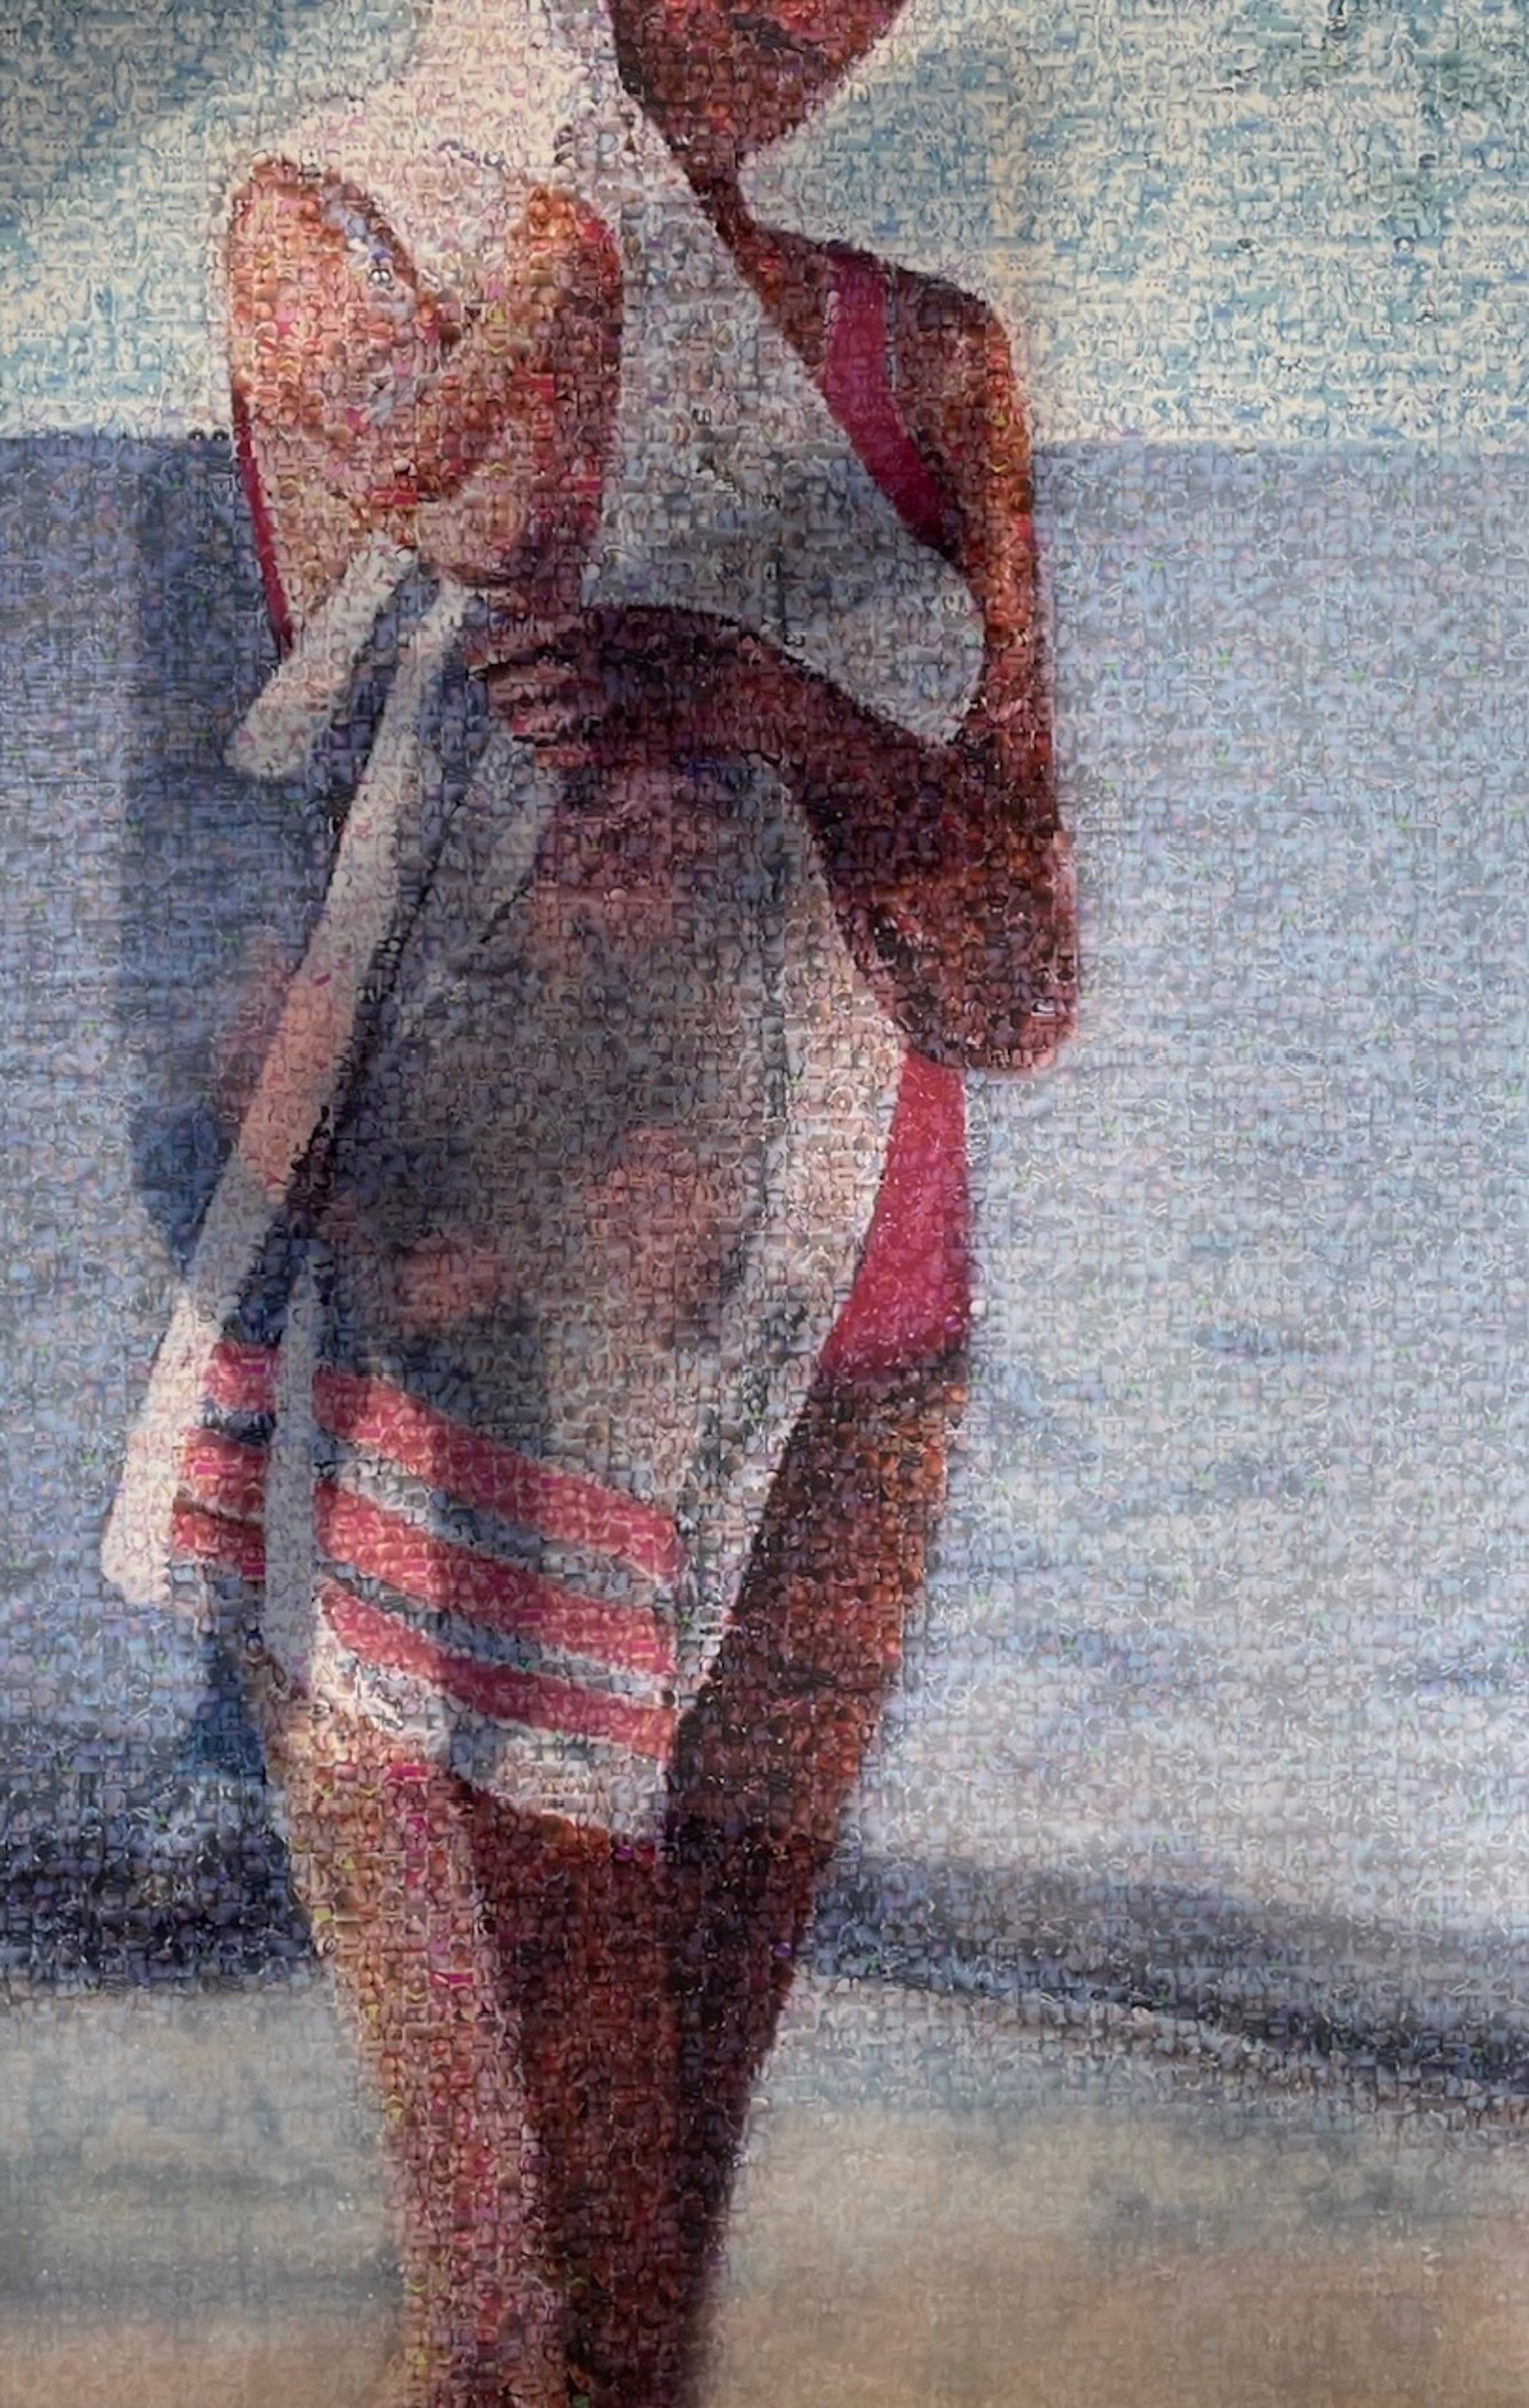 Girl with Towel (Mosaic) by Dean Johnson